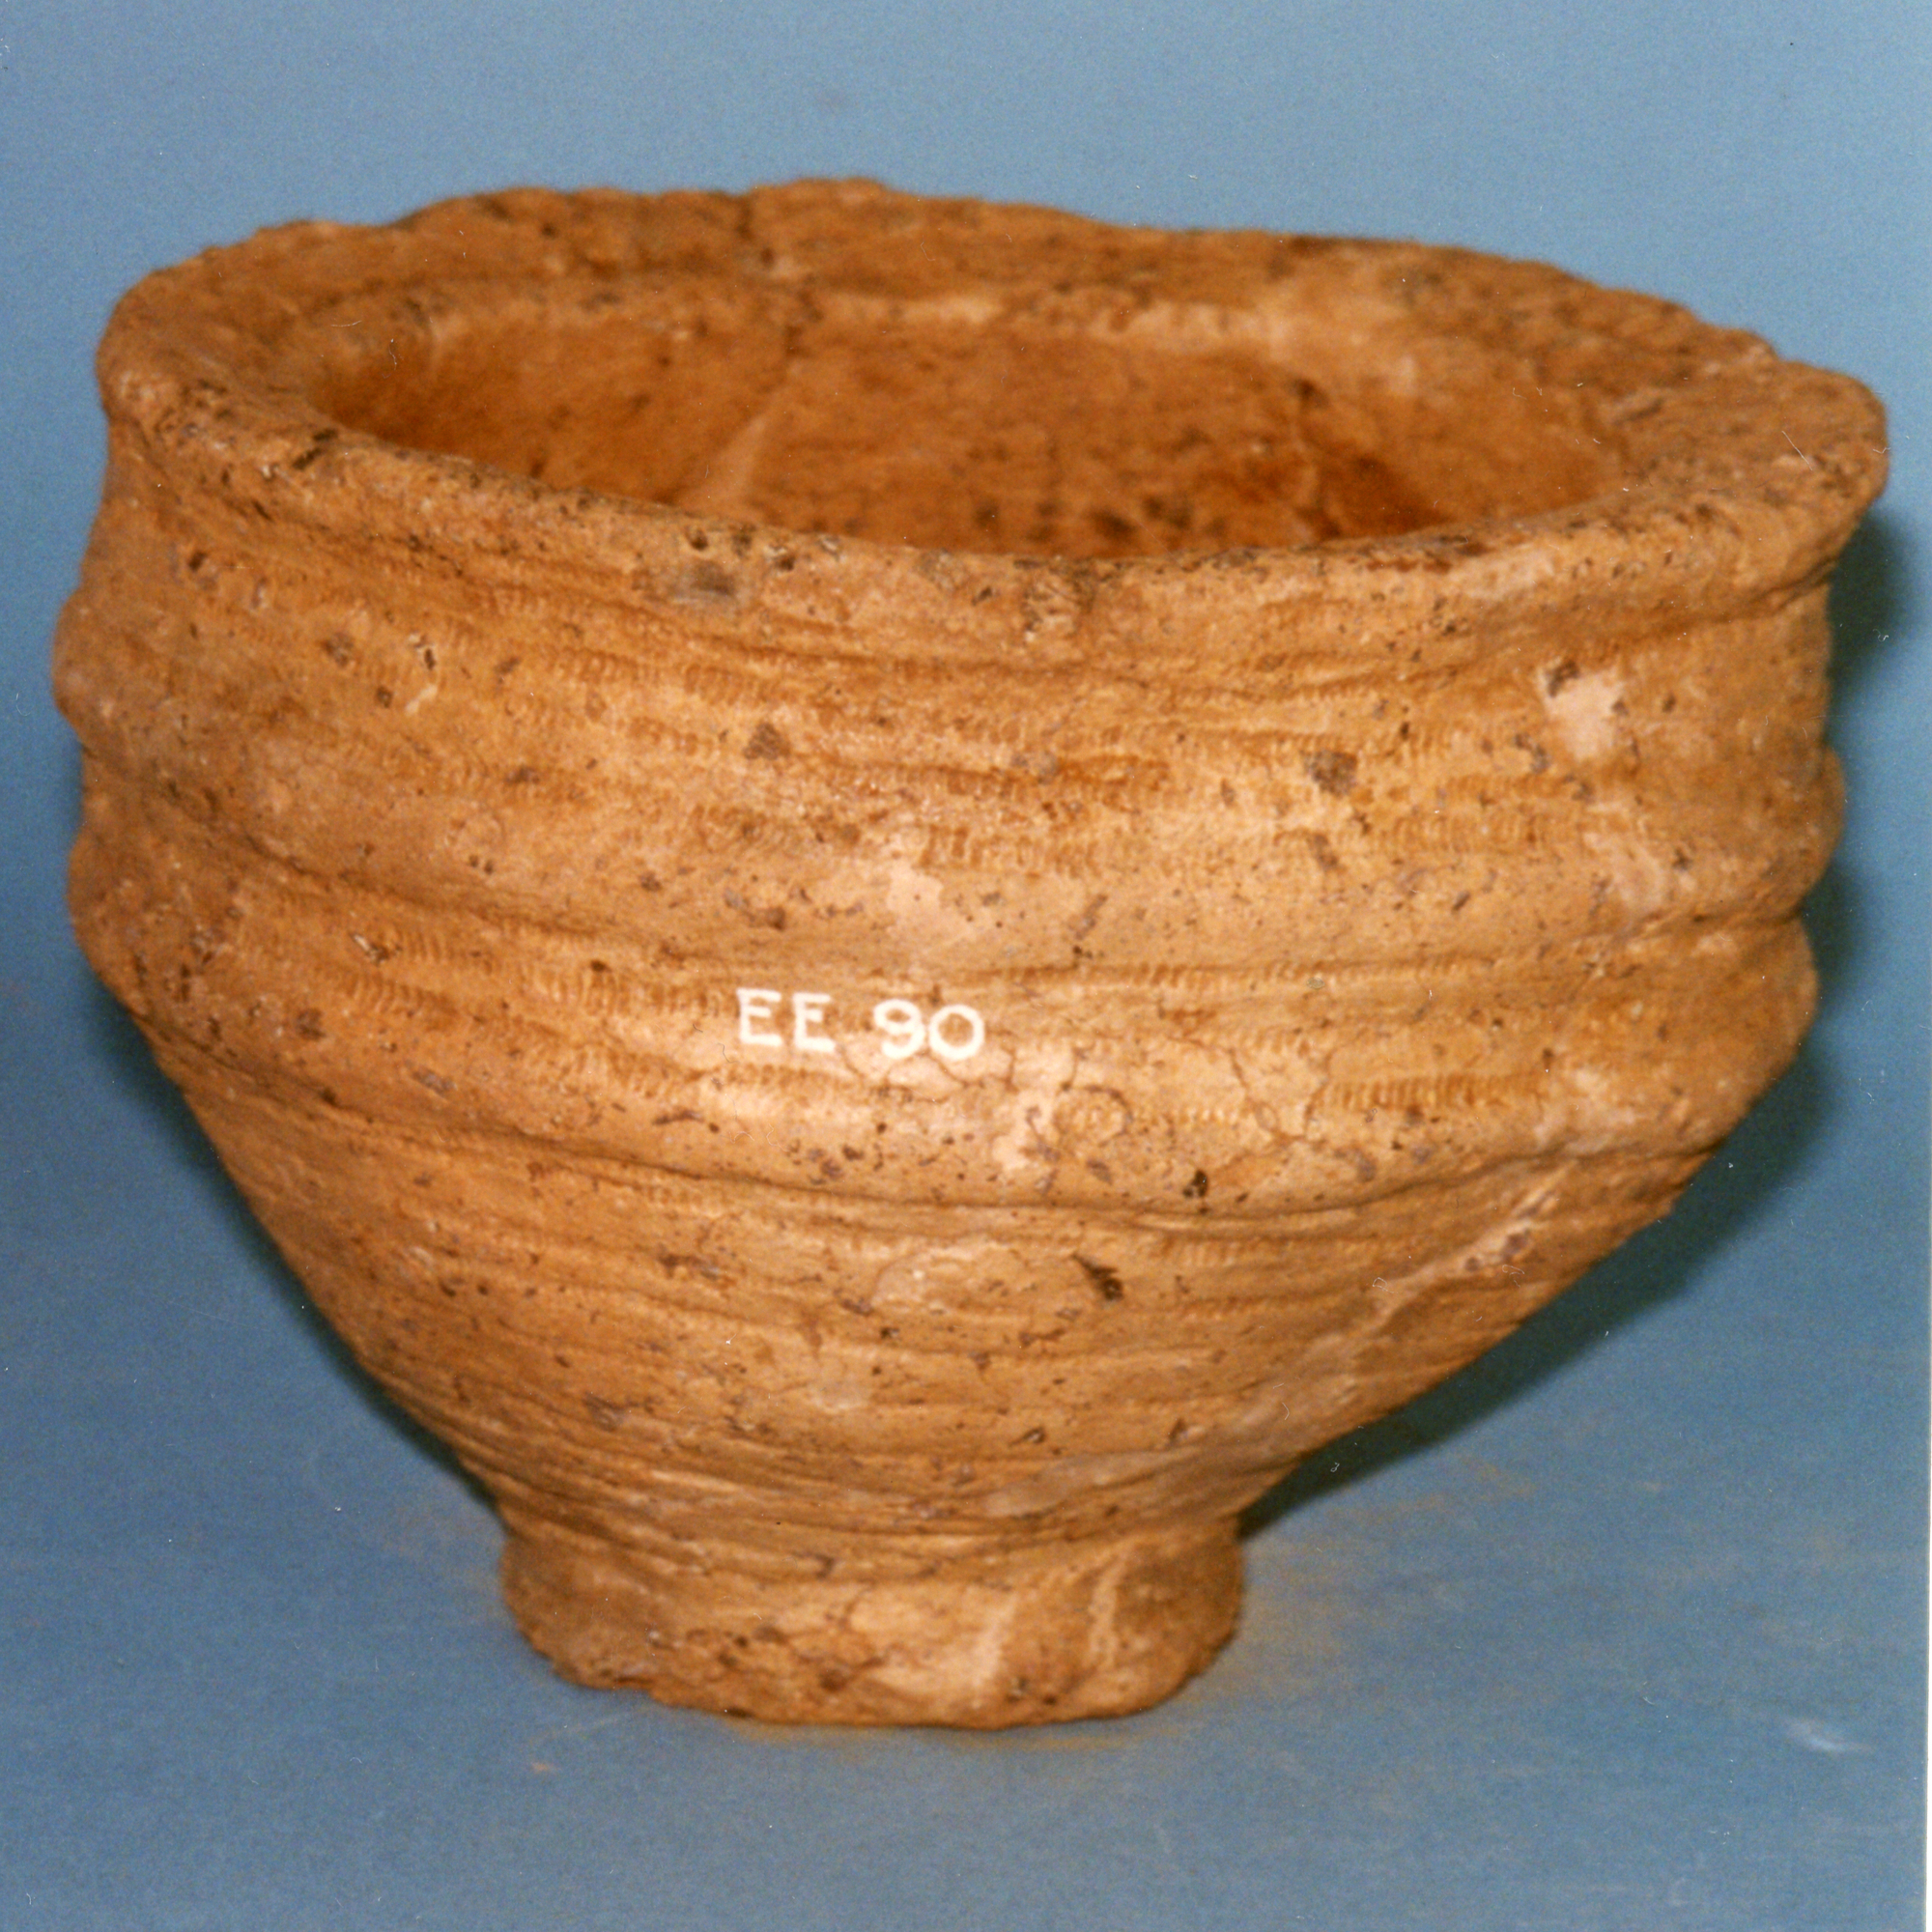 Image of Pottery food vessel from a cist on Battle Law, Naughton, Fife © National Museums Scotland